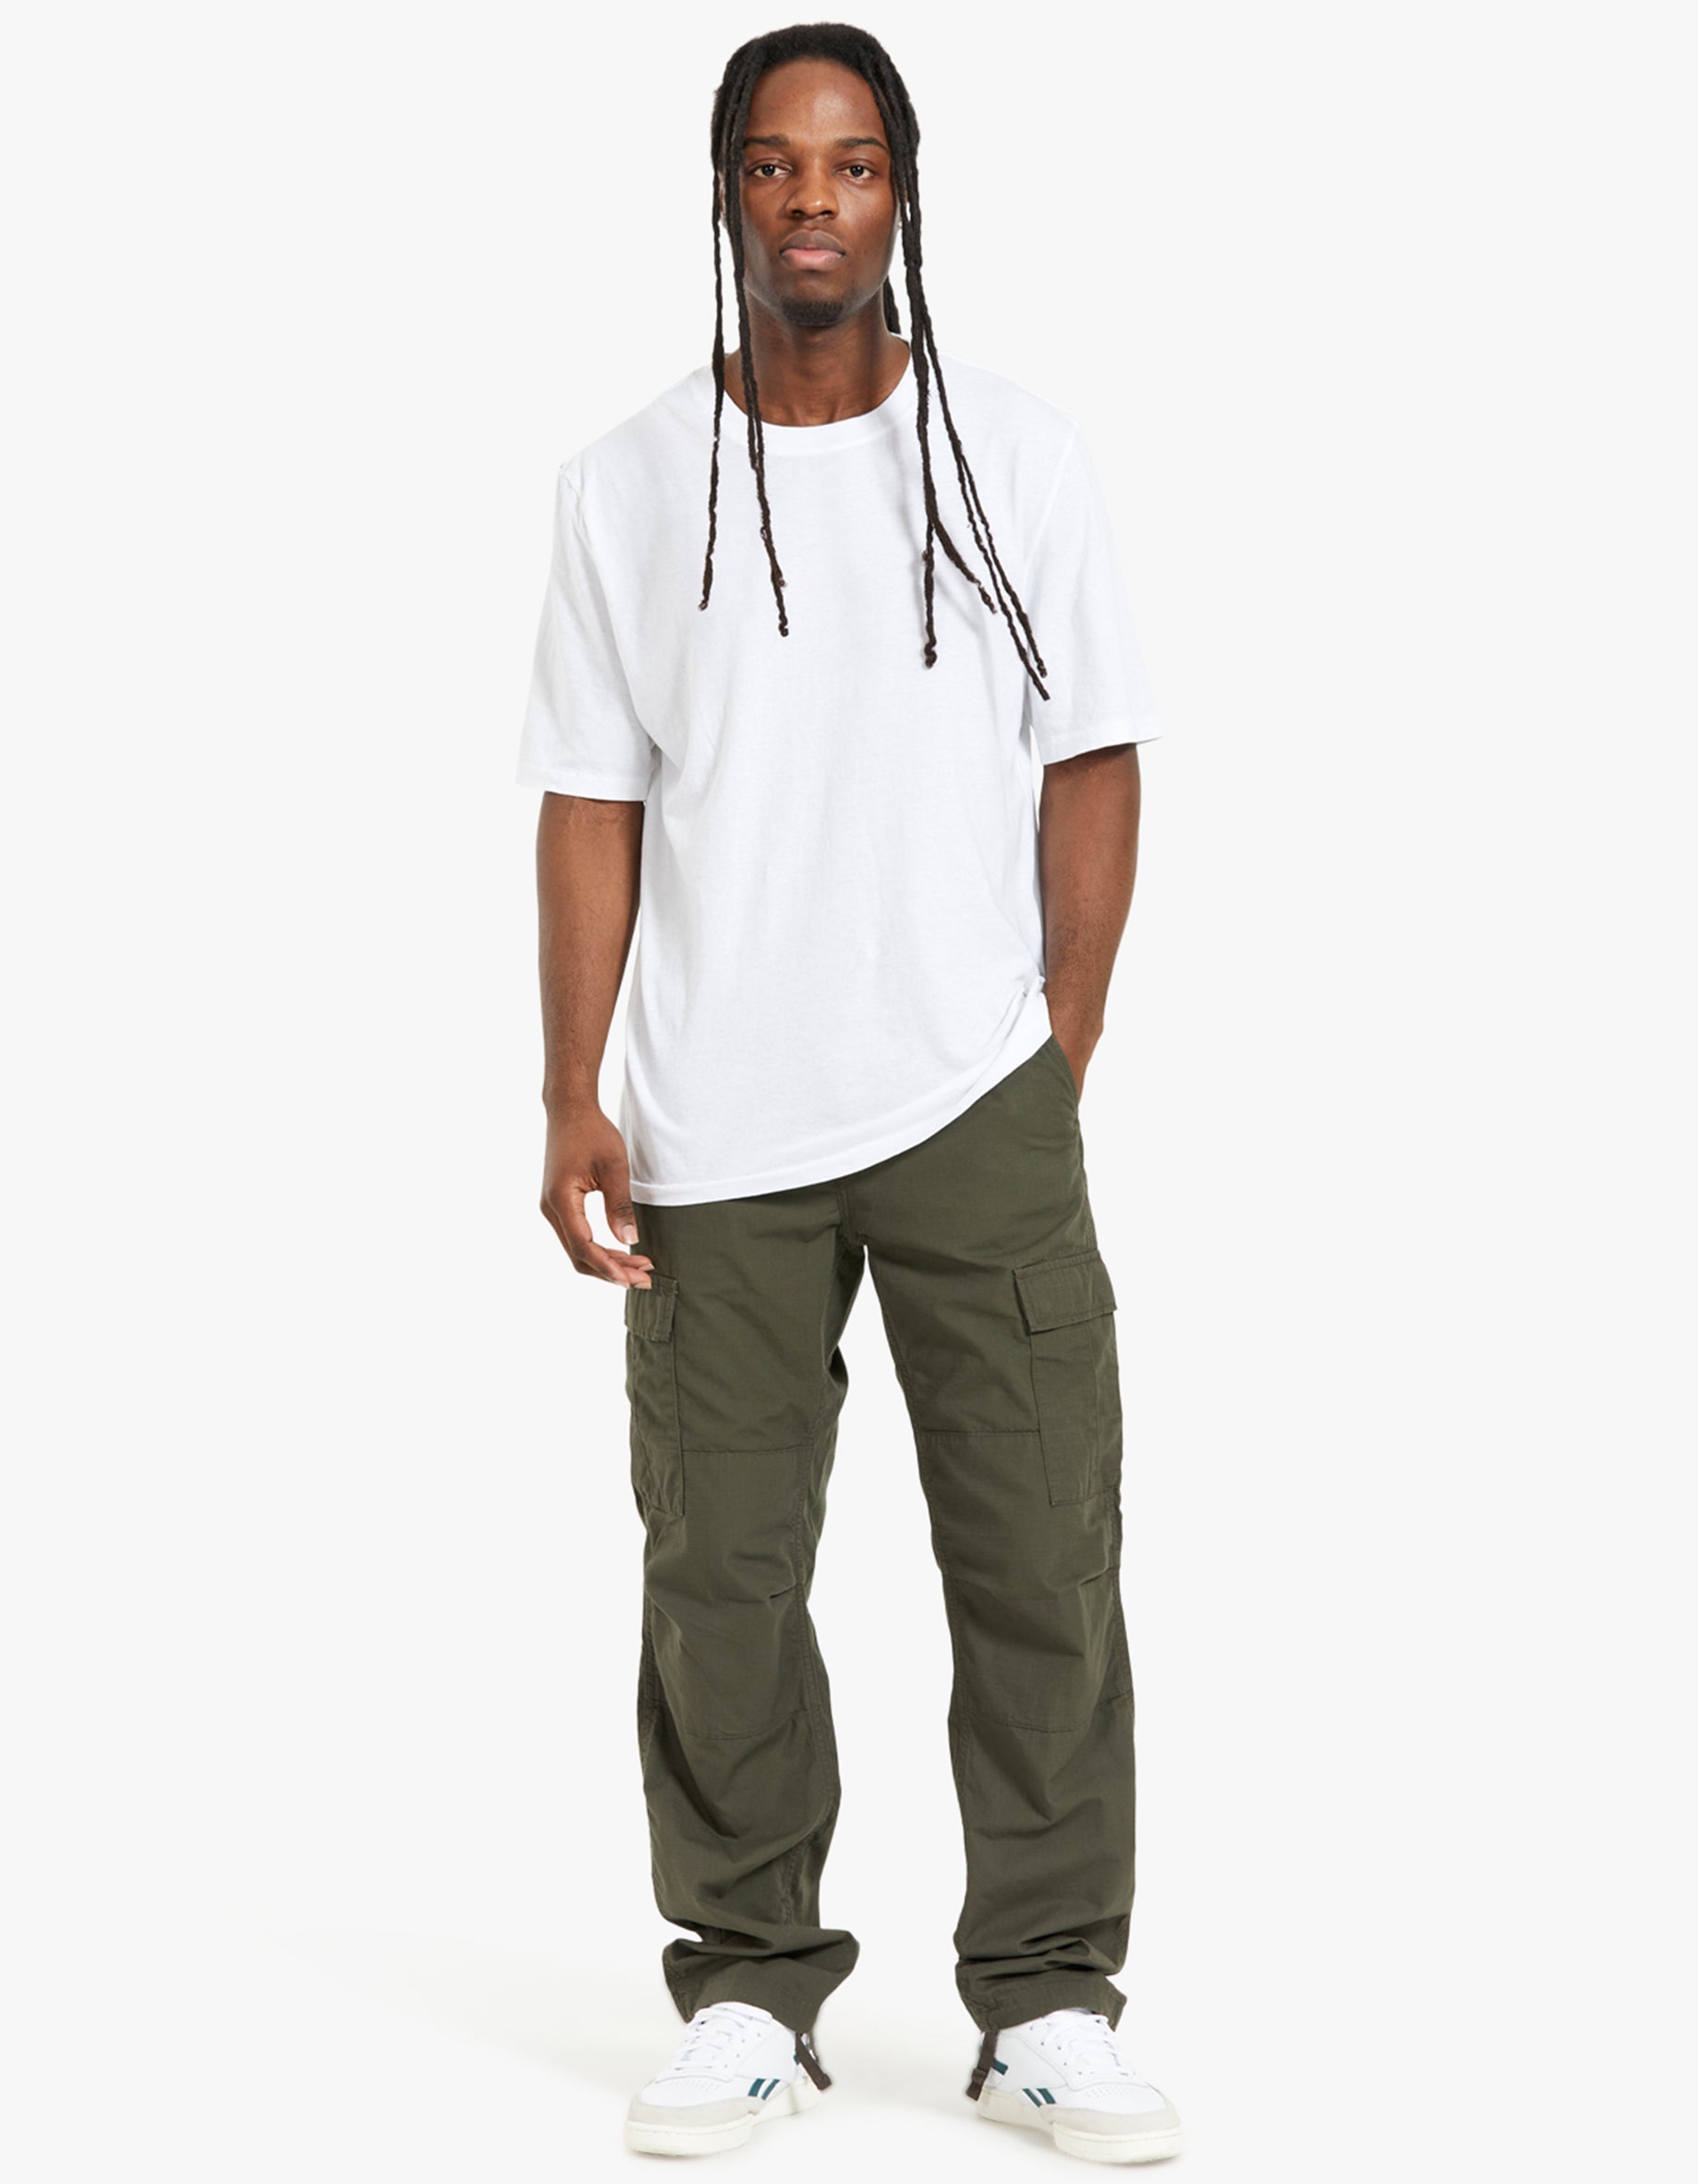 Carhartt WIP - Aviation Rinsed Black - Pants | IMPERICON US